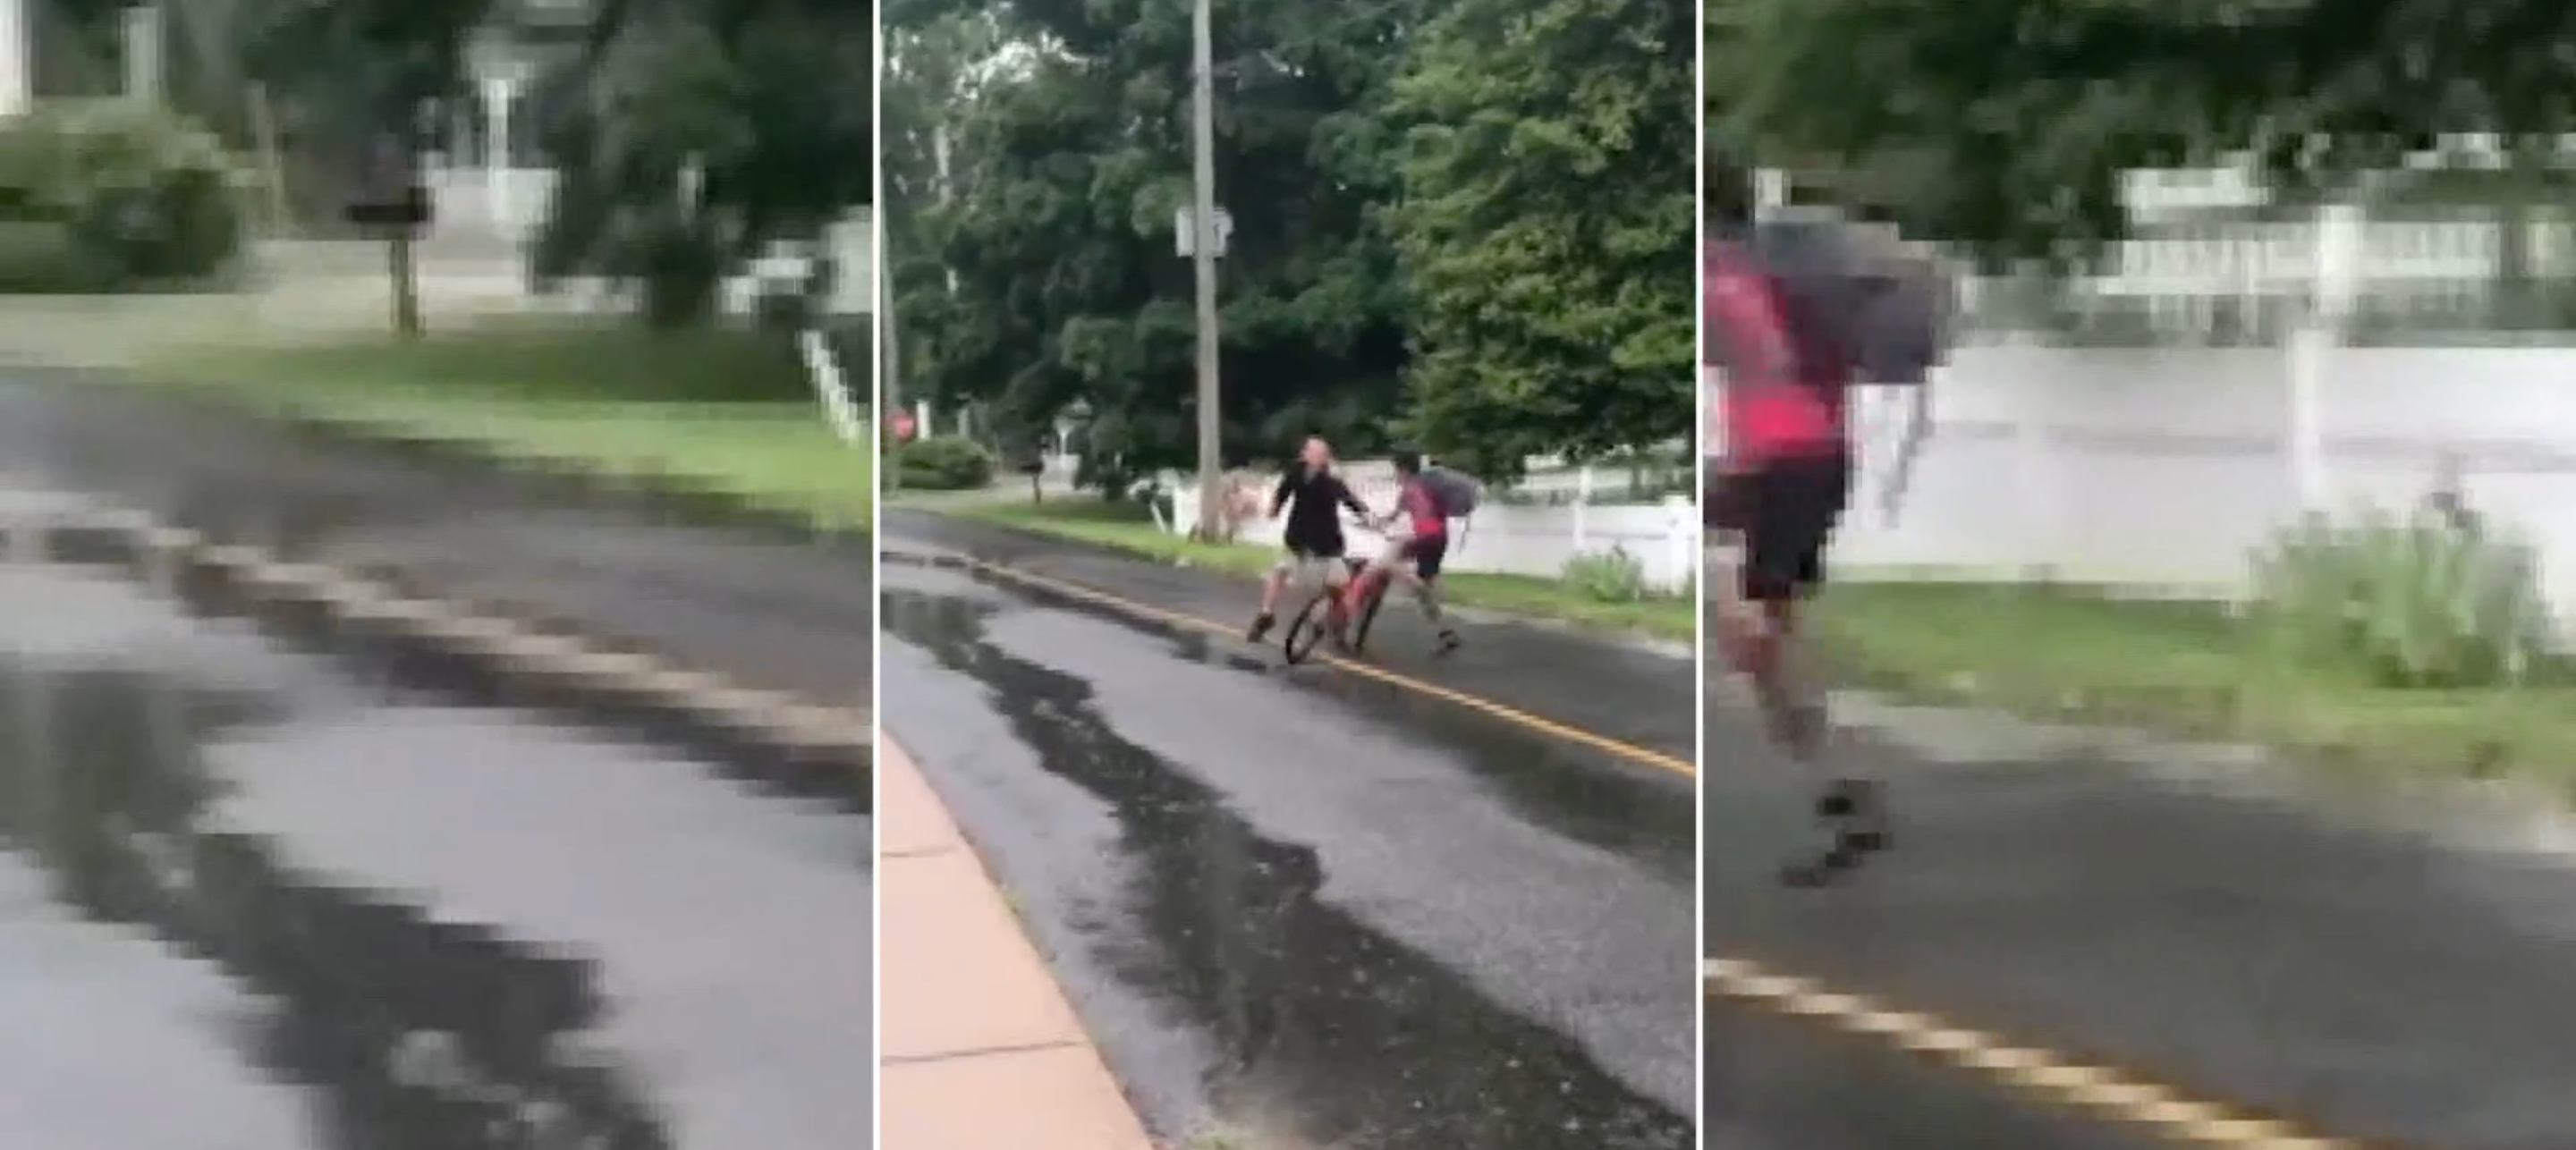 Footage of the incident in question as a man pushes a child off of his bicycle.